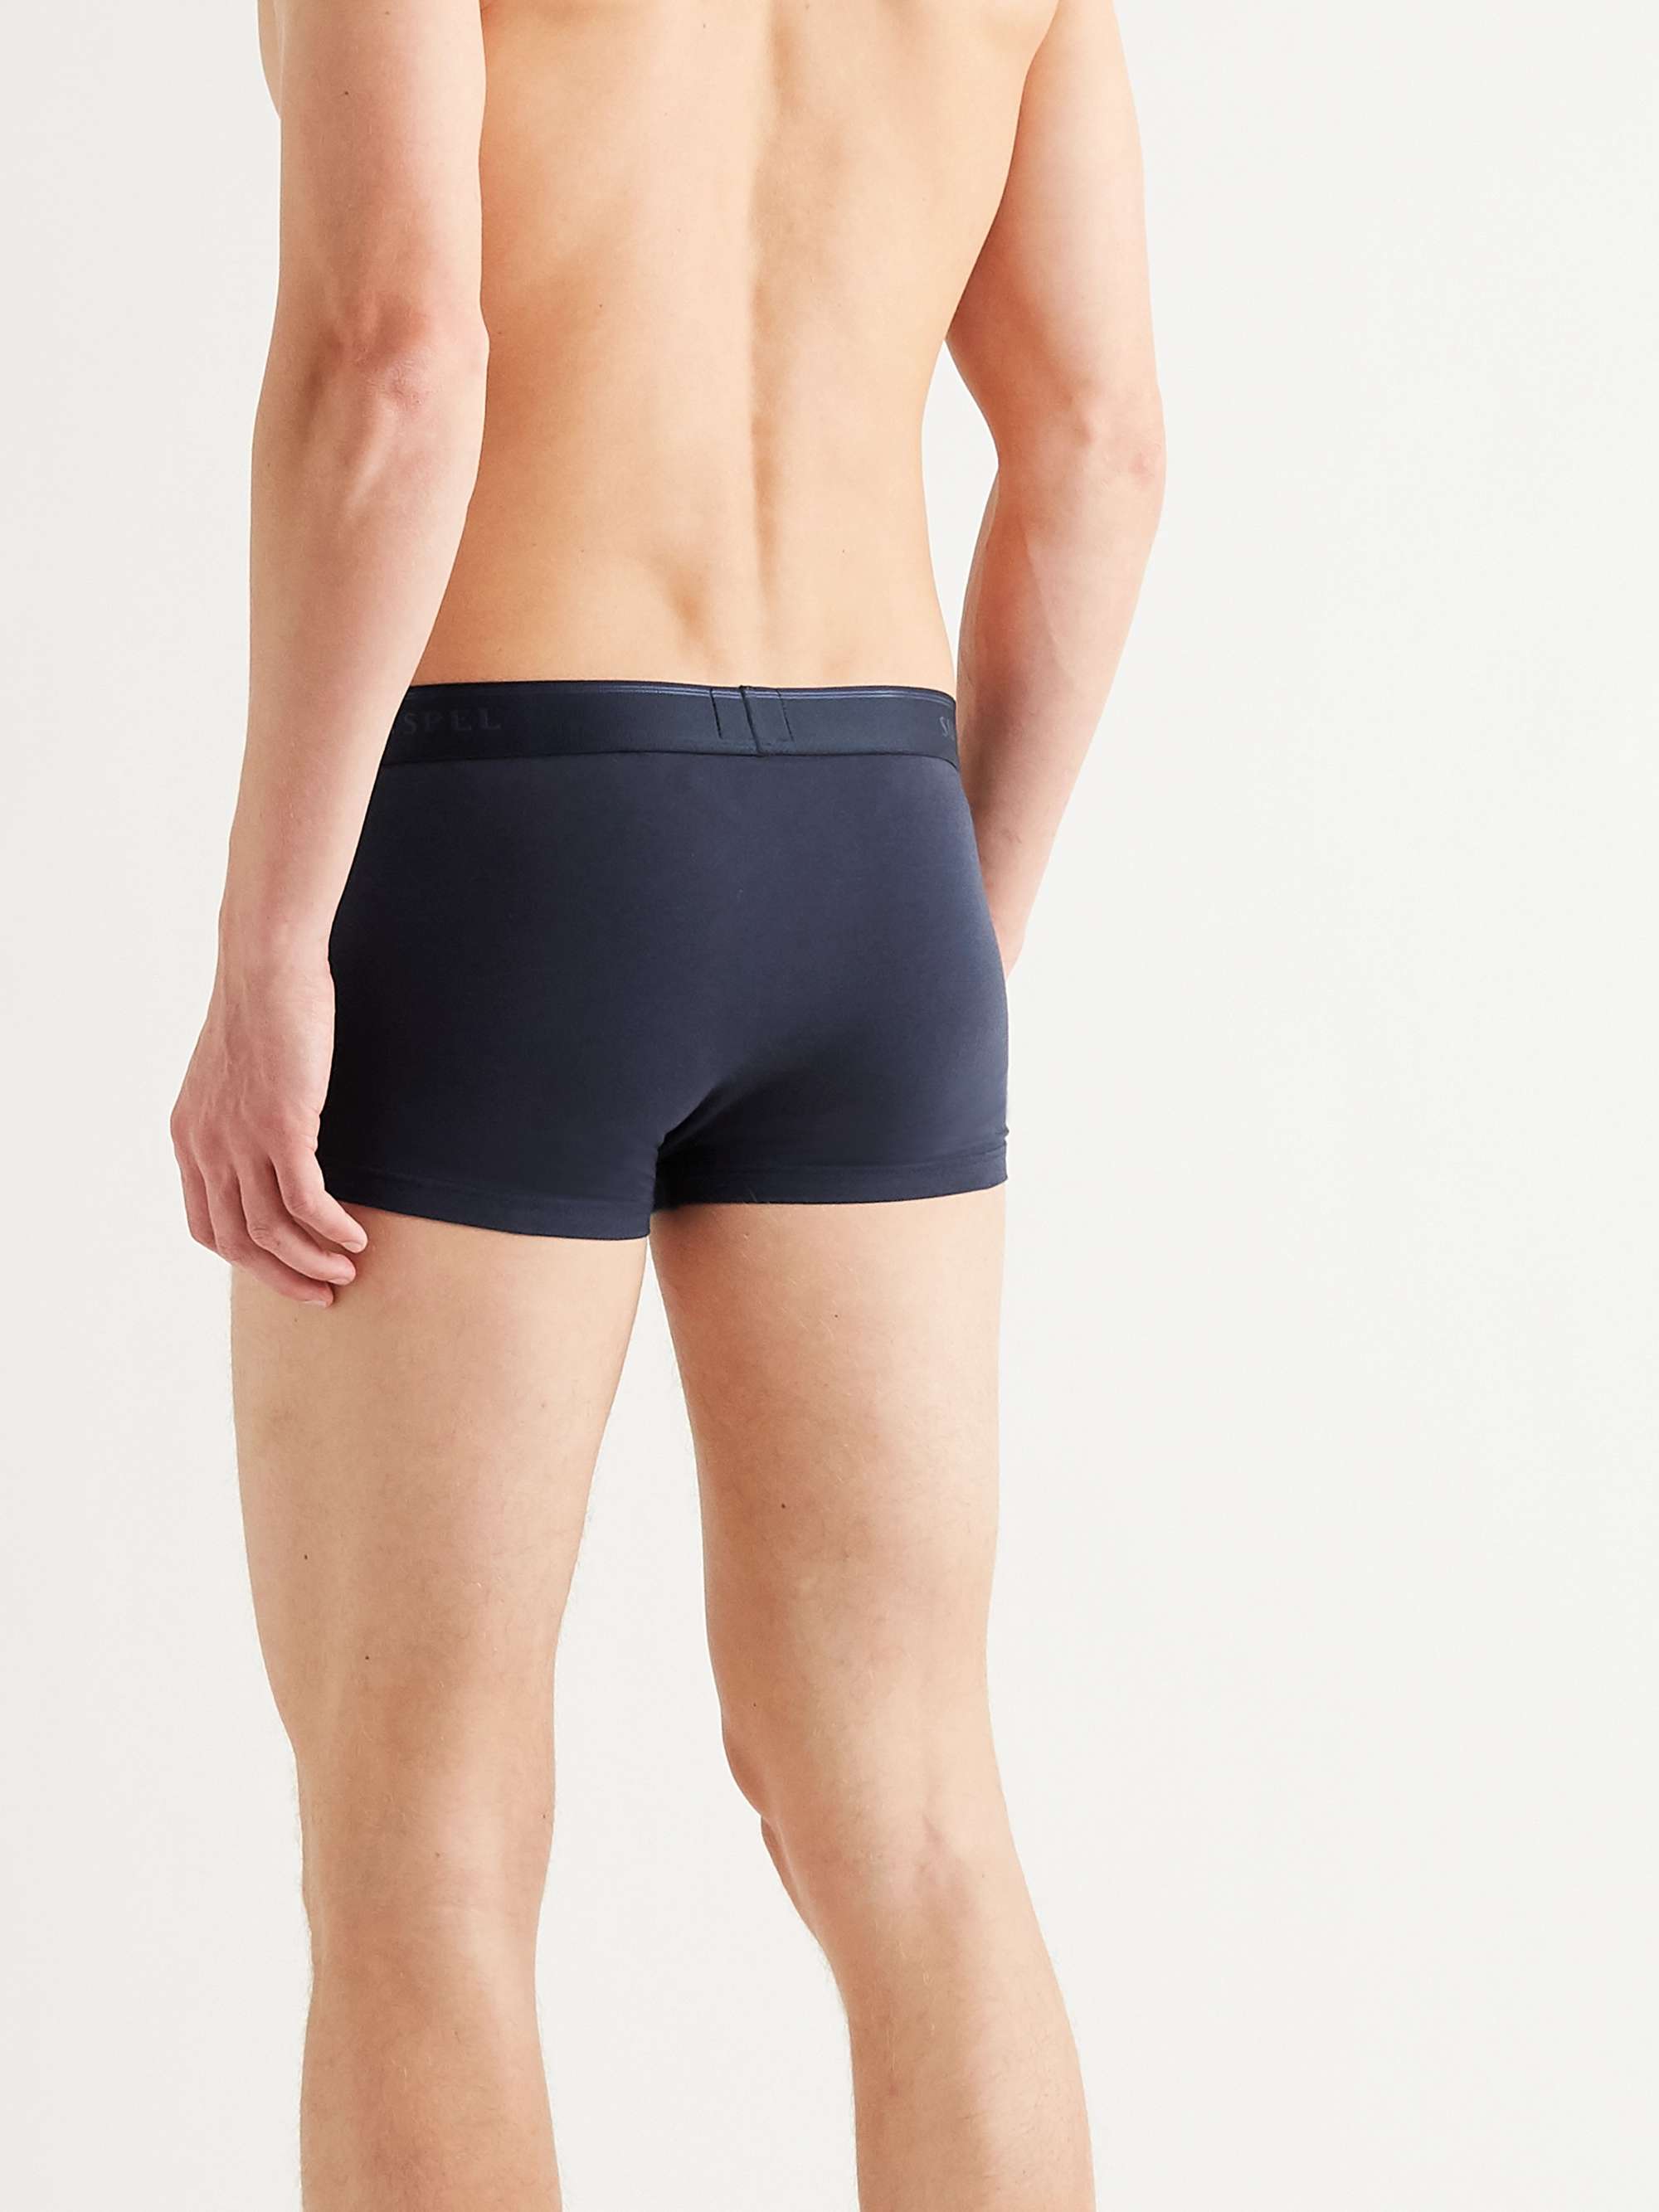 SUNSPEL Two-Pack Stretch-Cotton Boxer Briefs